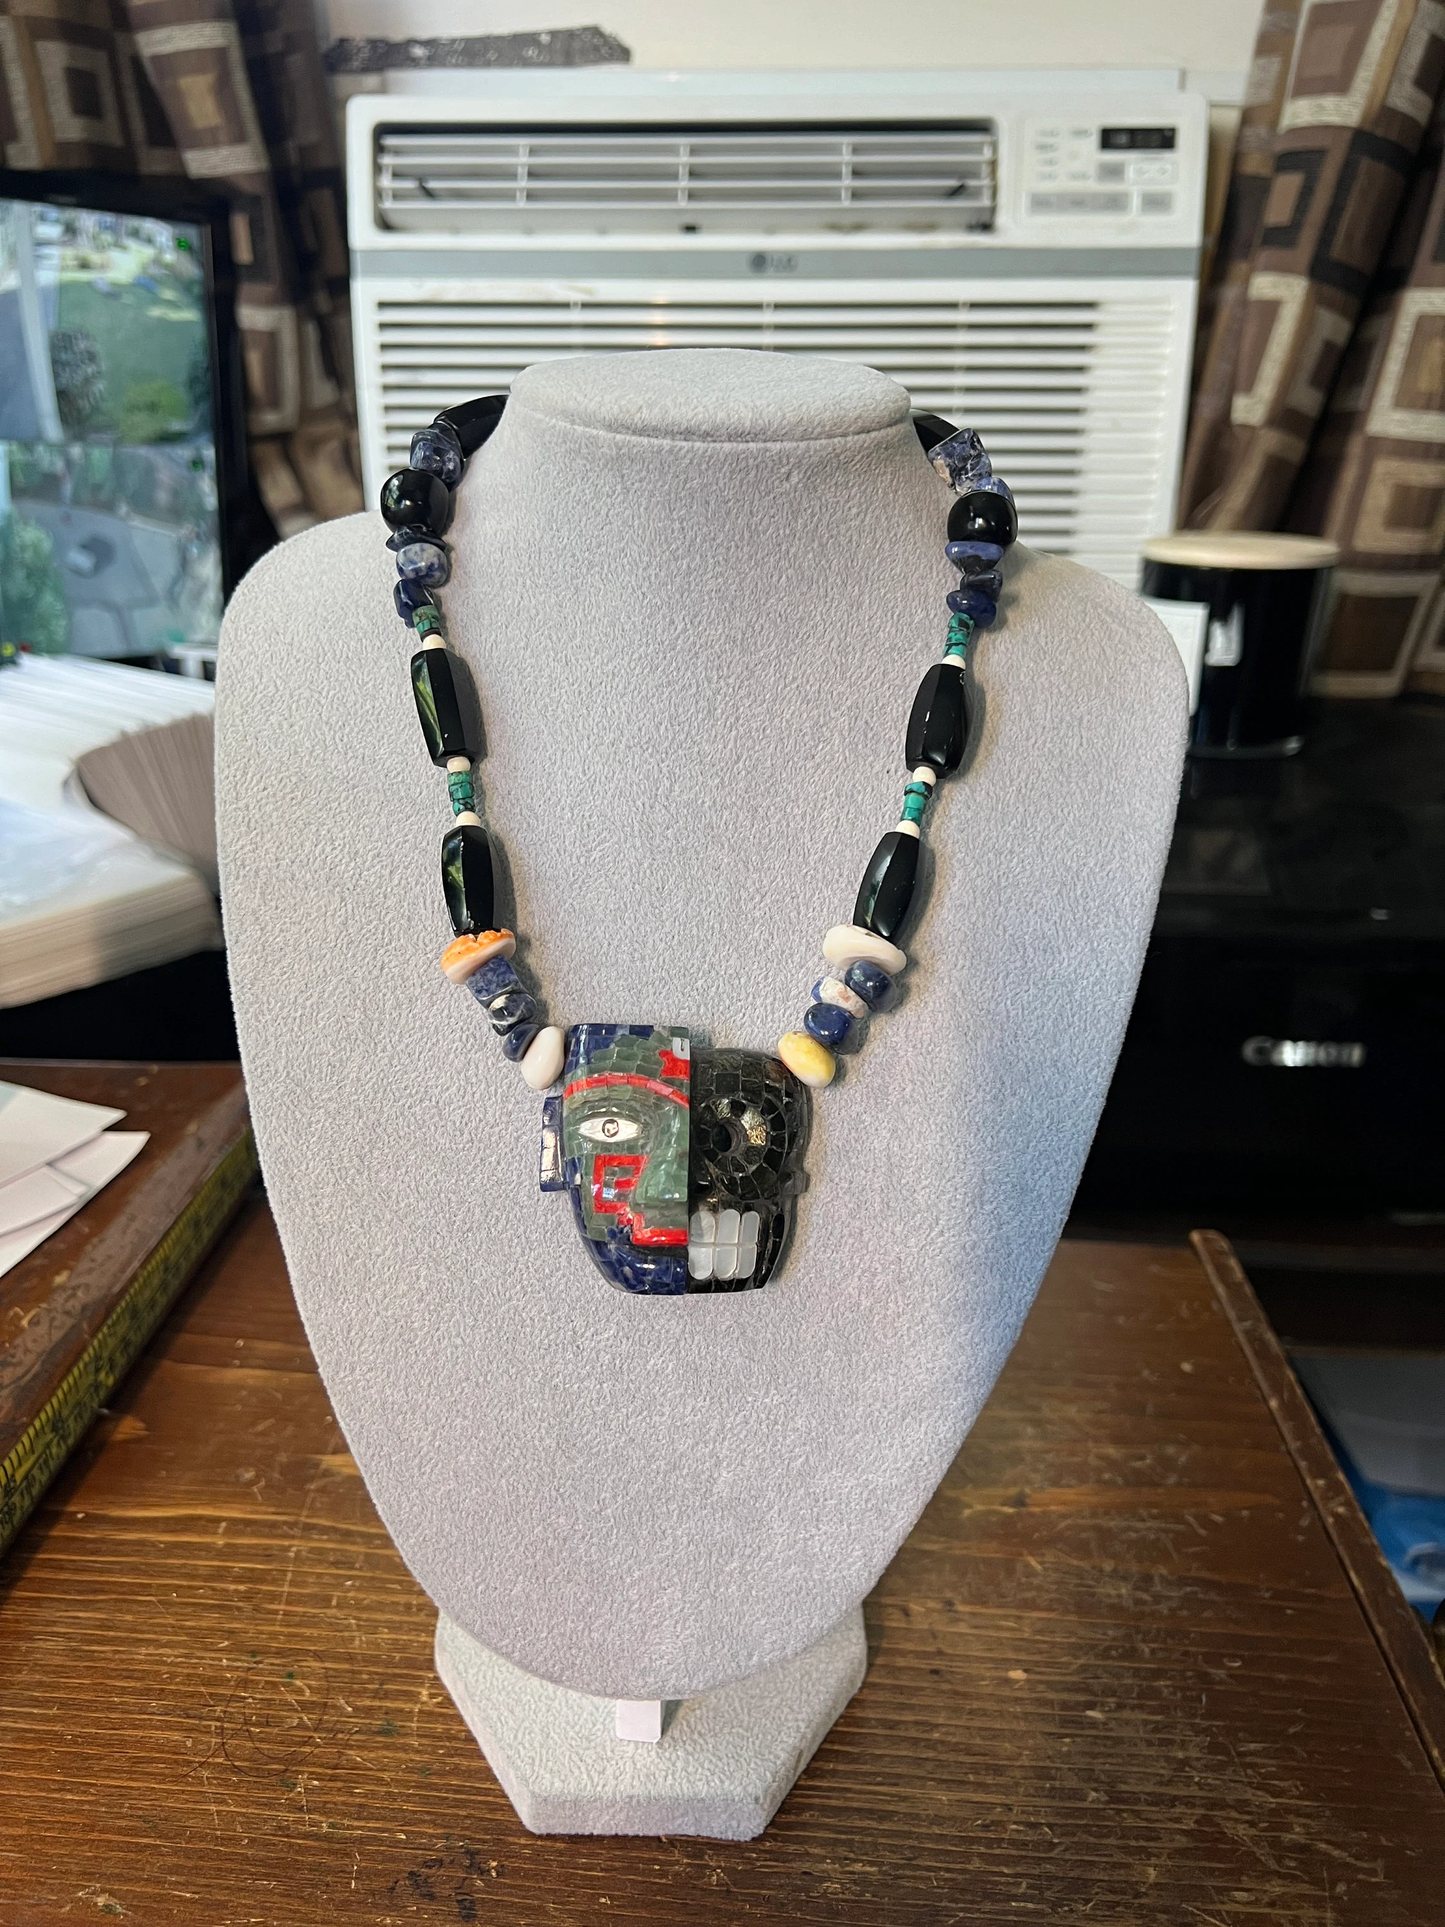 Life and Death Aztec Death Mask Necklace, Jade, Mother of Pearl, Black Gold Obsidian, 18", Mayan, Mexican, Mexican, Indigenous Jewelry (#14)